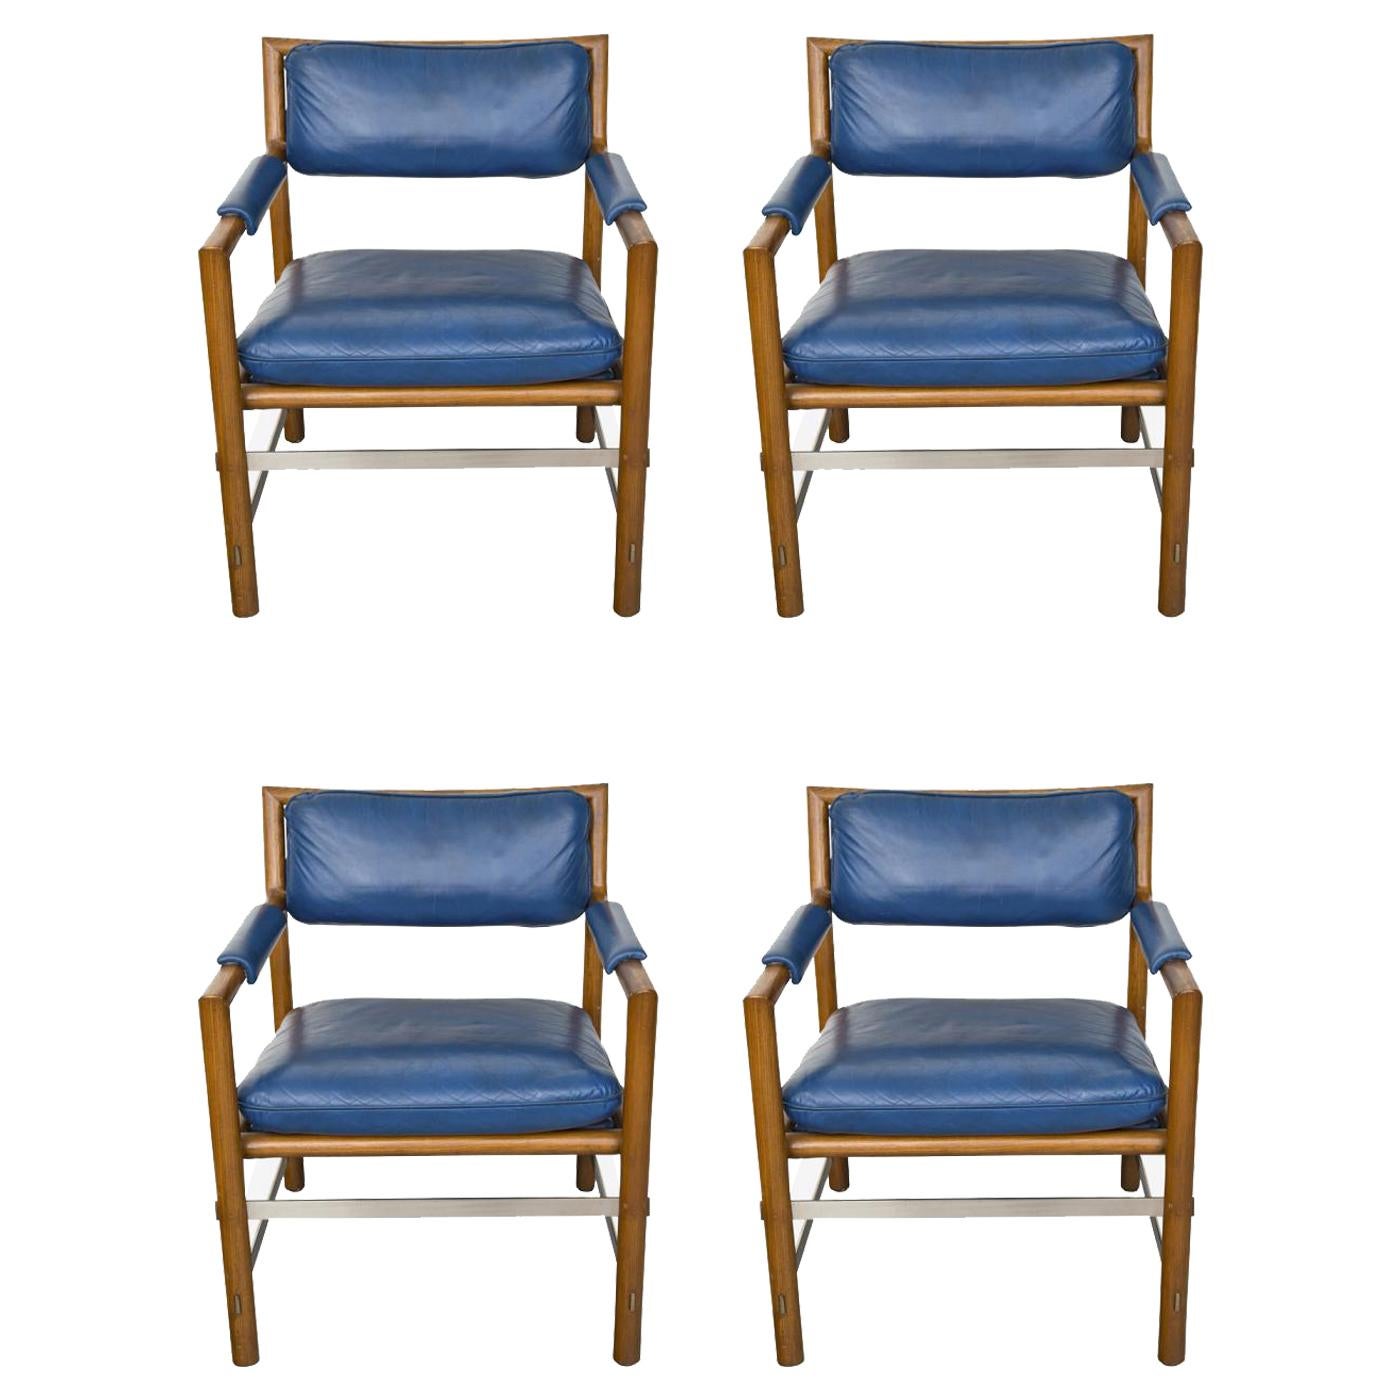 Ed Wormley for Dunbar Blue Leather, Wood and Stainless Steel Chairs, Set of 4